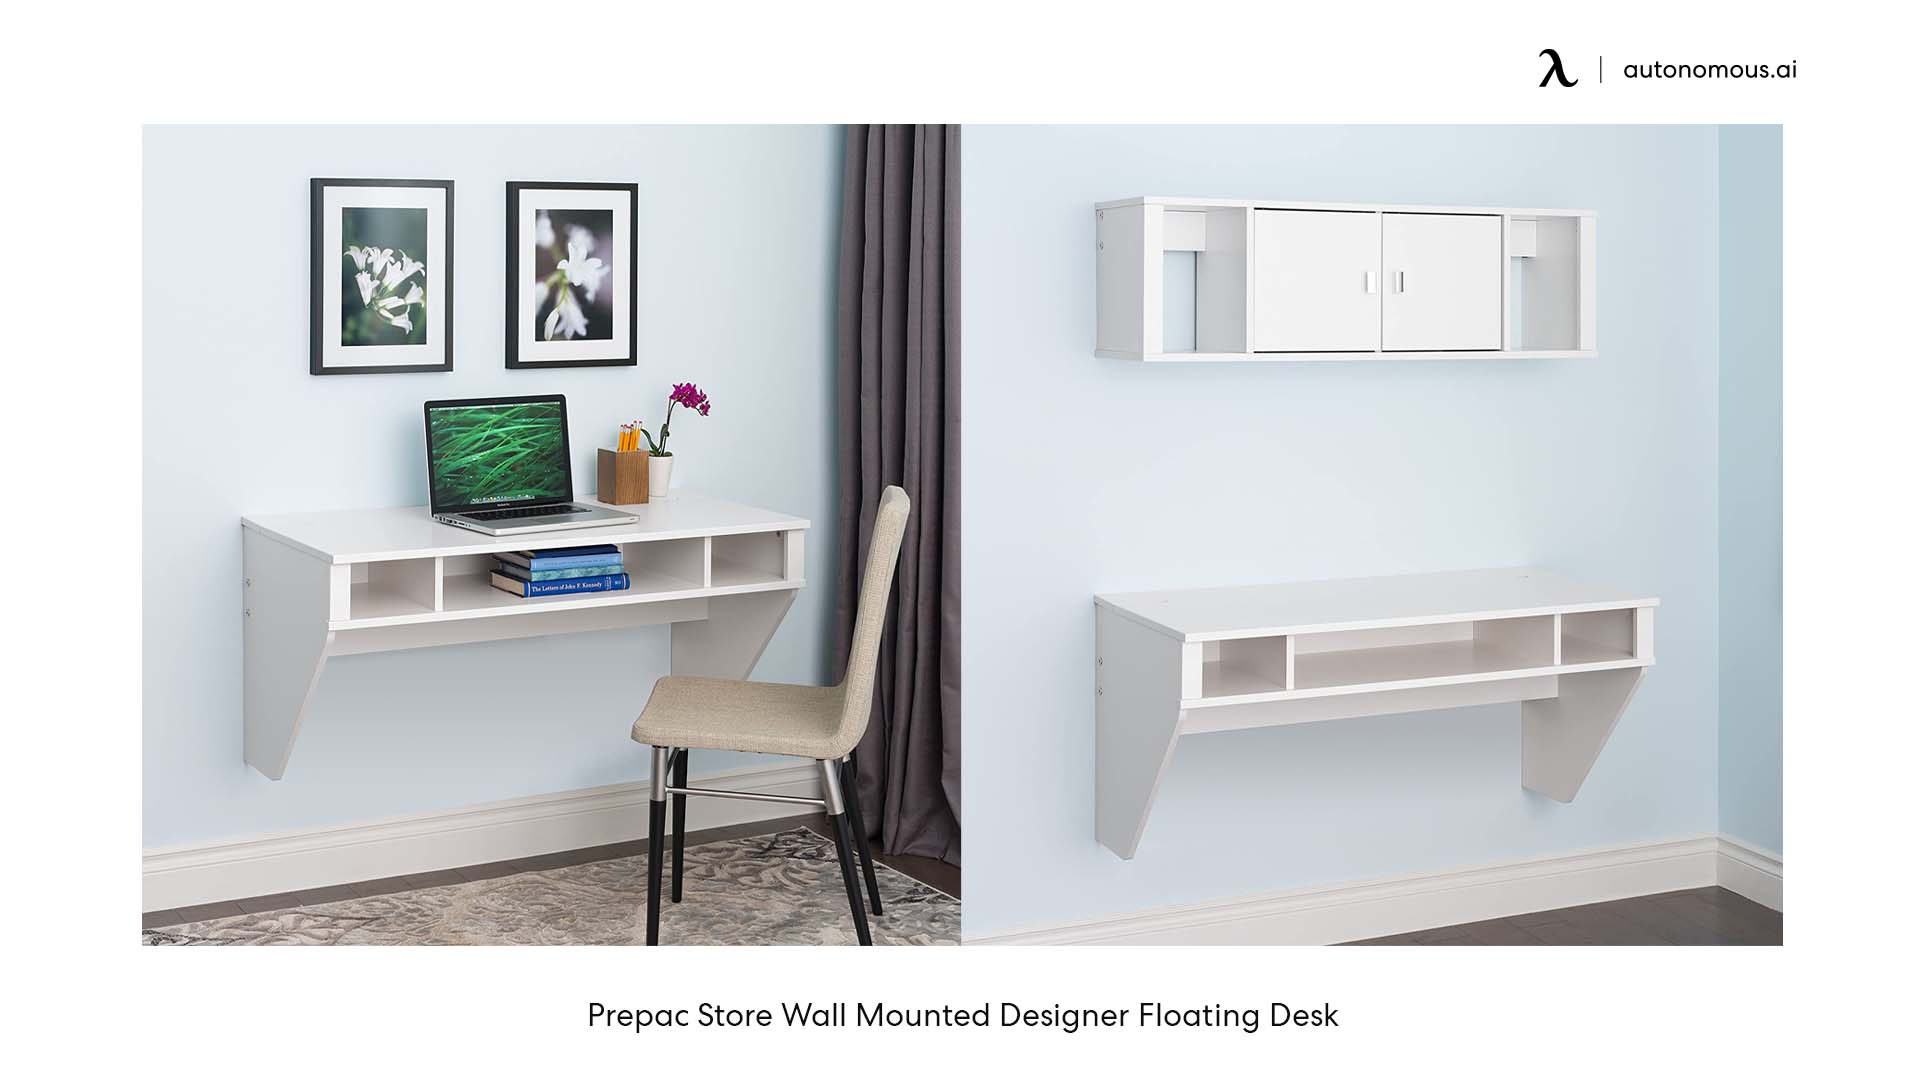 The Floating Wall Desk small office furniture